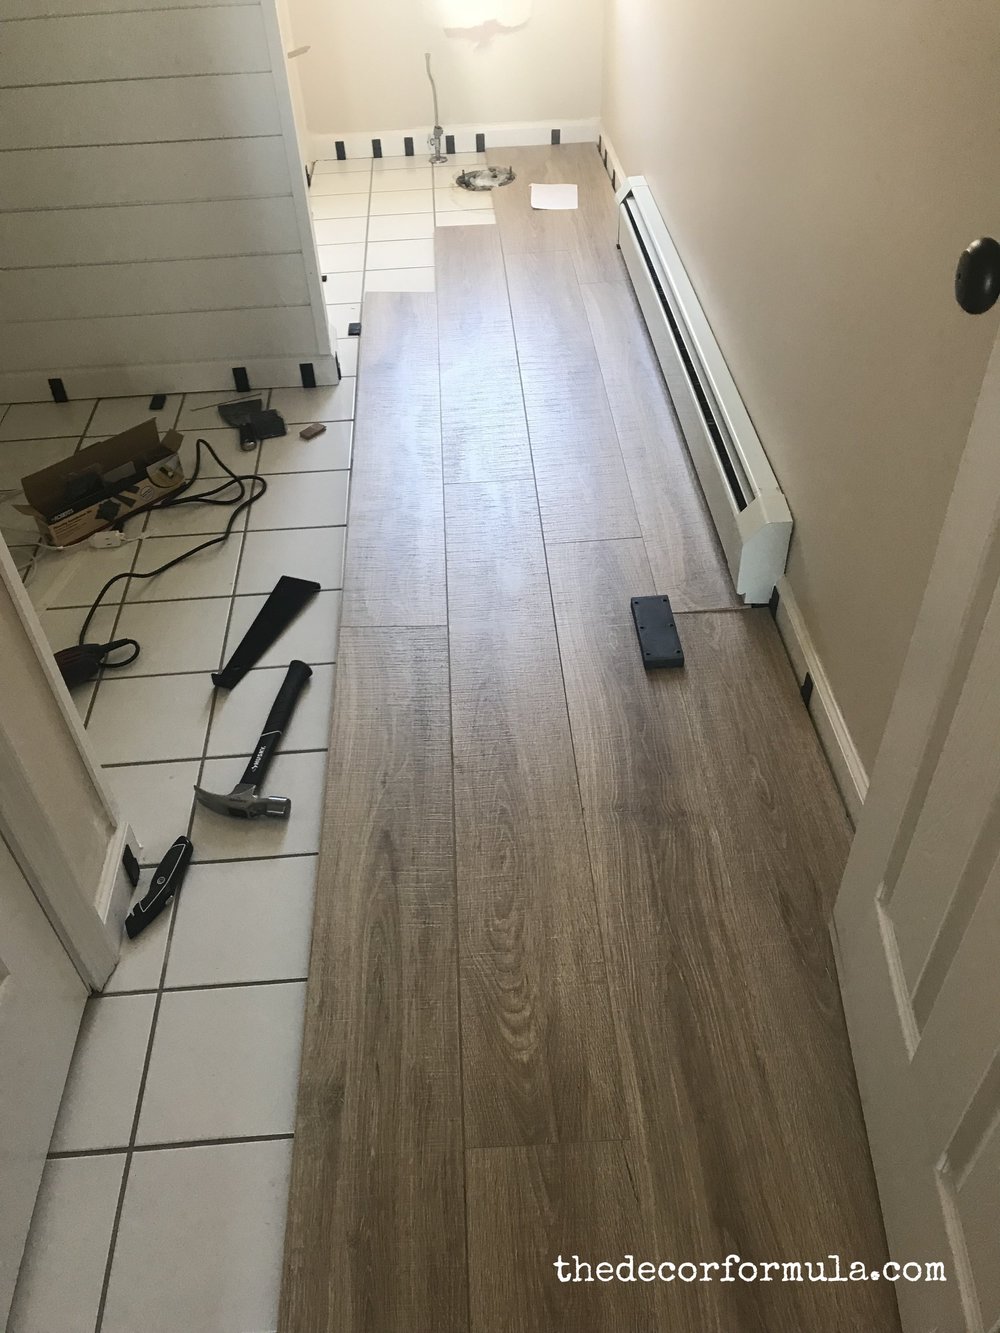 Ideas For Covering Up Tile Floors, What Is The Best Flooring To Lay Over Tile